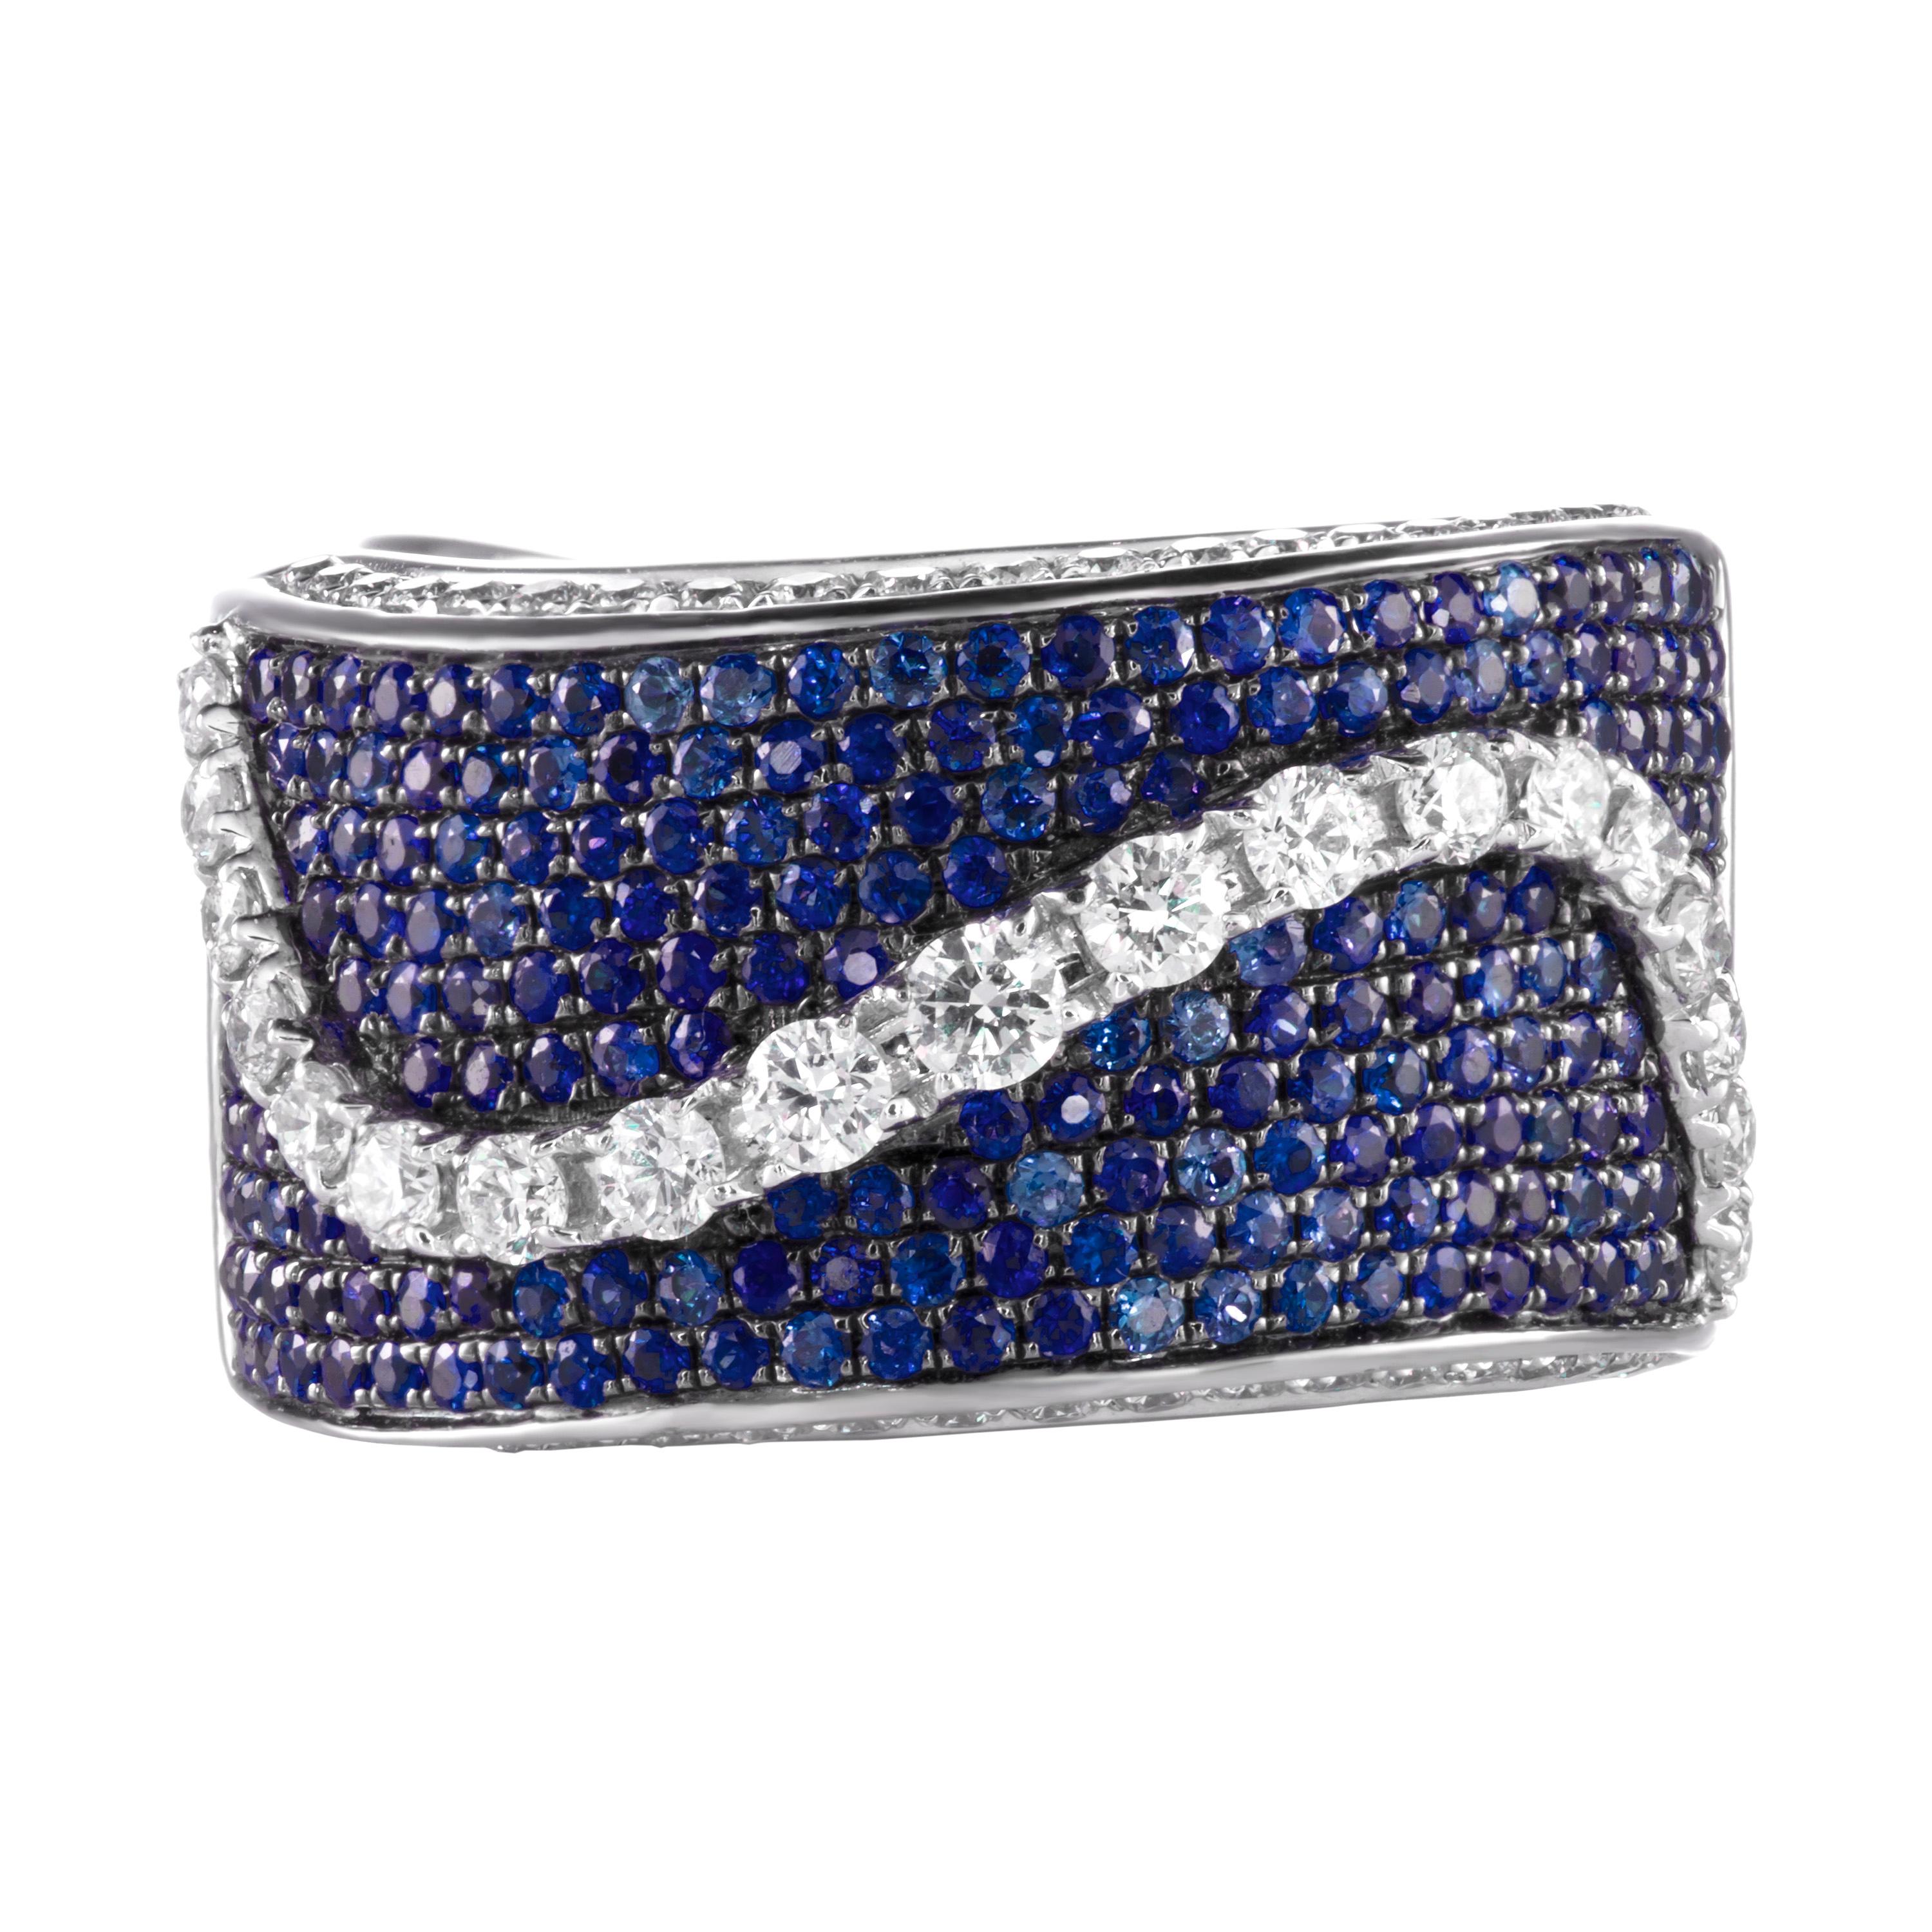 A beautifully crafted band ring with 1.22 carats of royal blue sapphires and a center wave of 0.86 carats of brilliant round diamonds.  Set in 18K white gold.  Currently a ring size US 7.  For other sizes, please contact seller.  Also available in